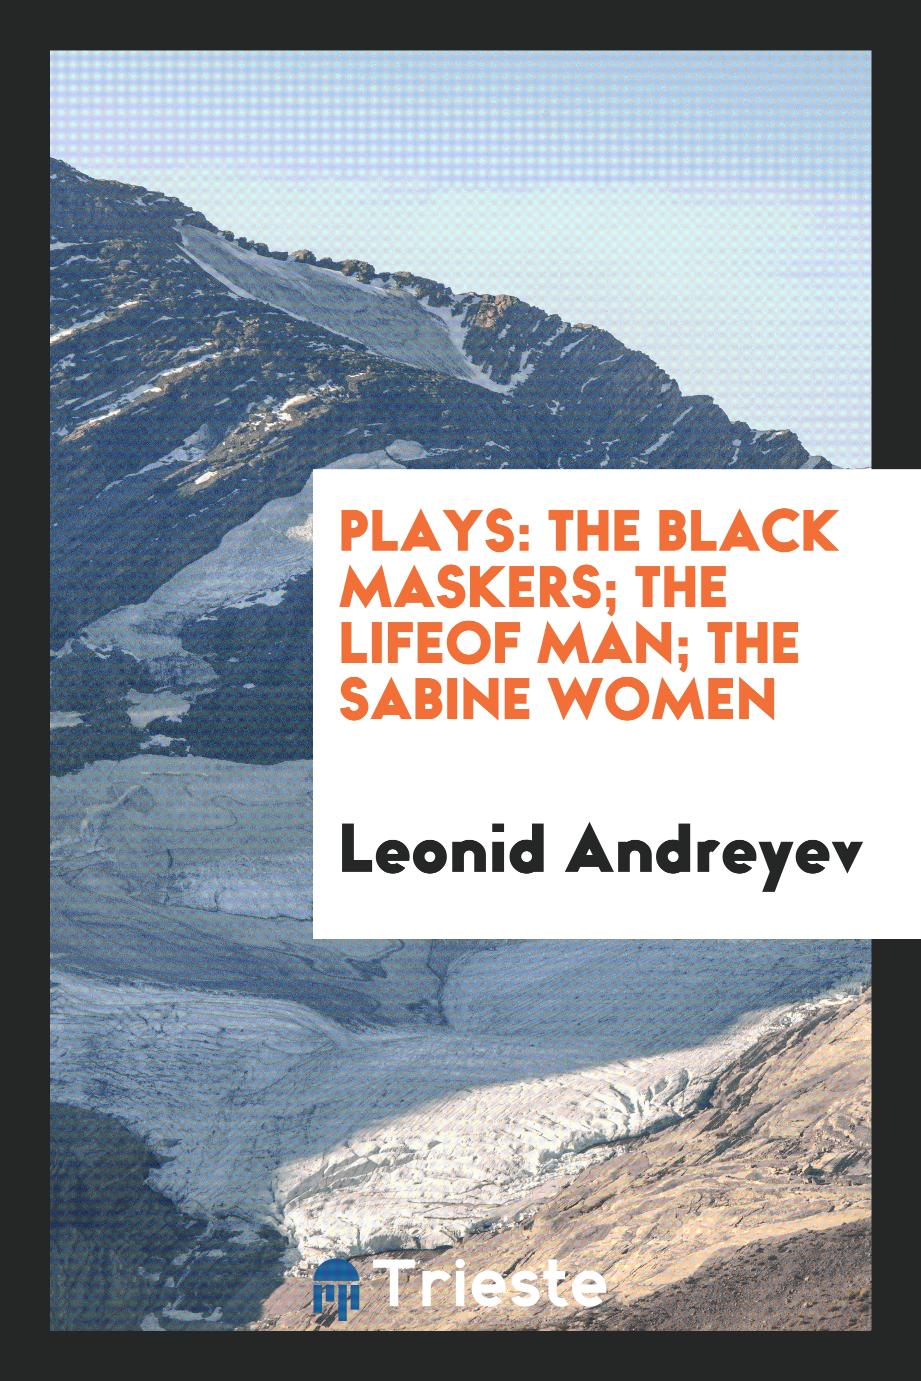 Plays: The black maskers; The lifeof man; The sabine women